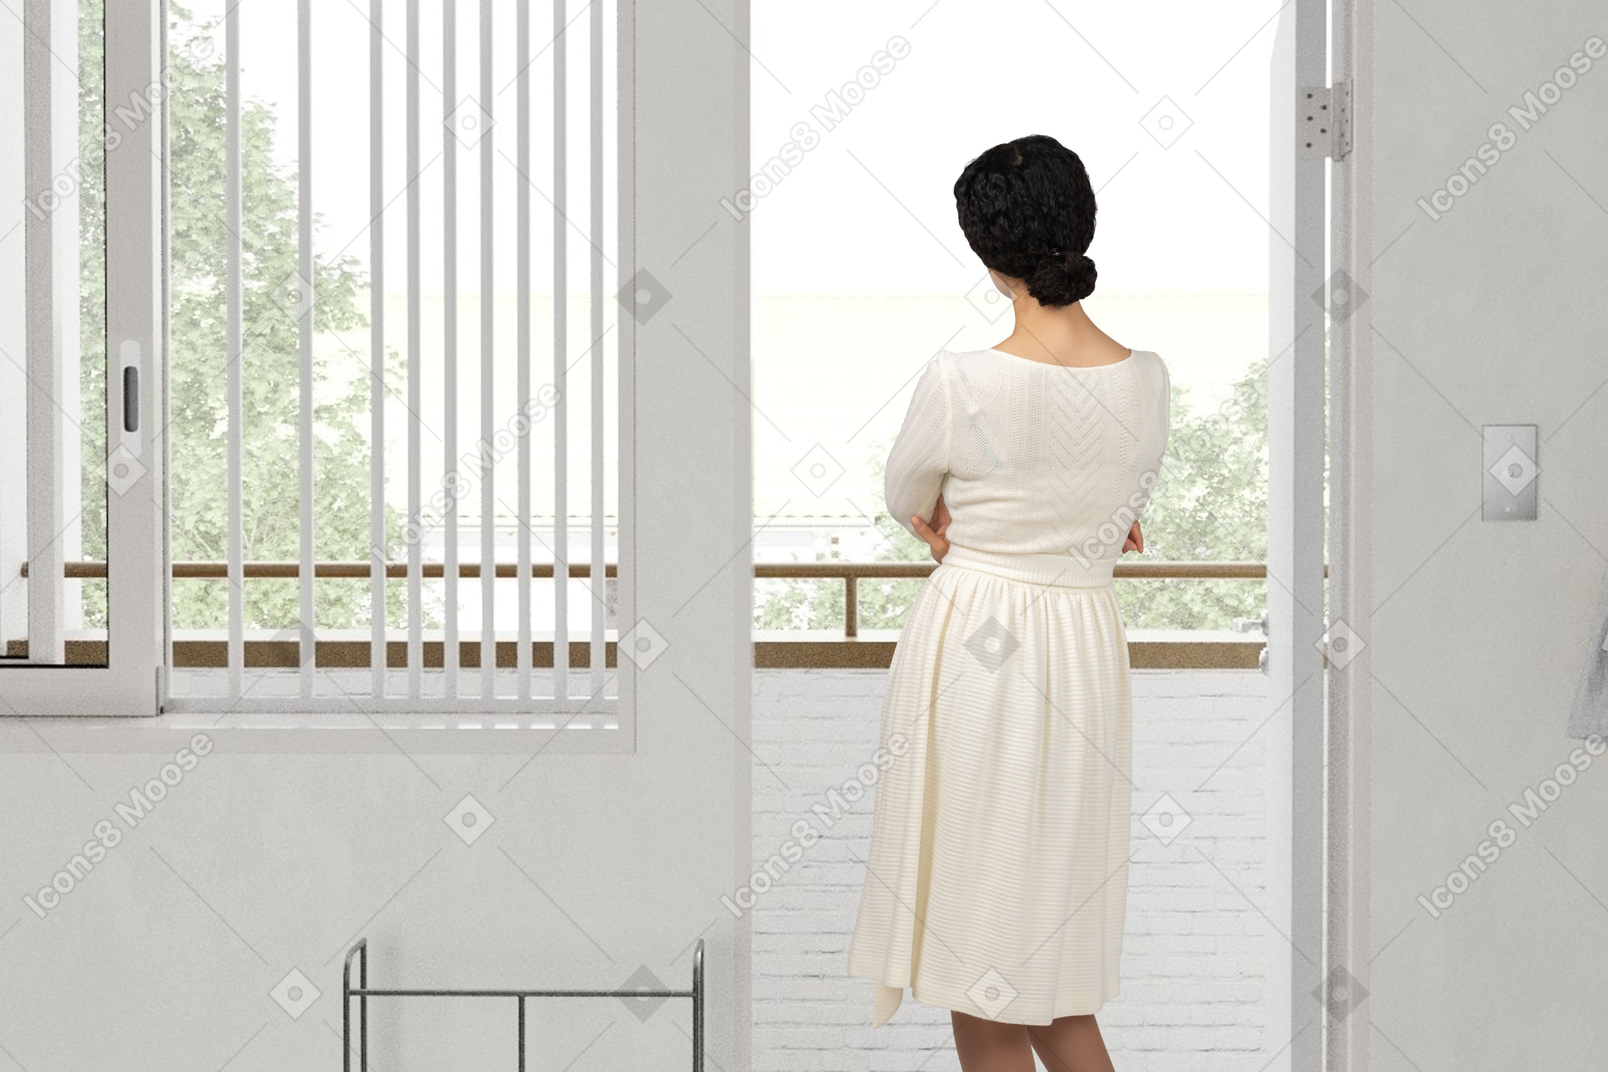 Back view of a woman in a white dress standing on a balcony